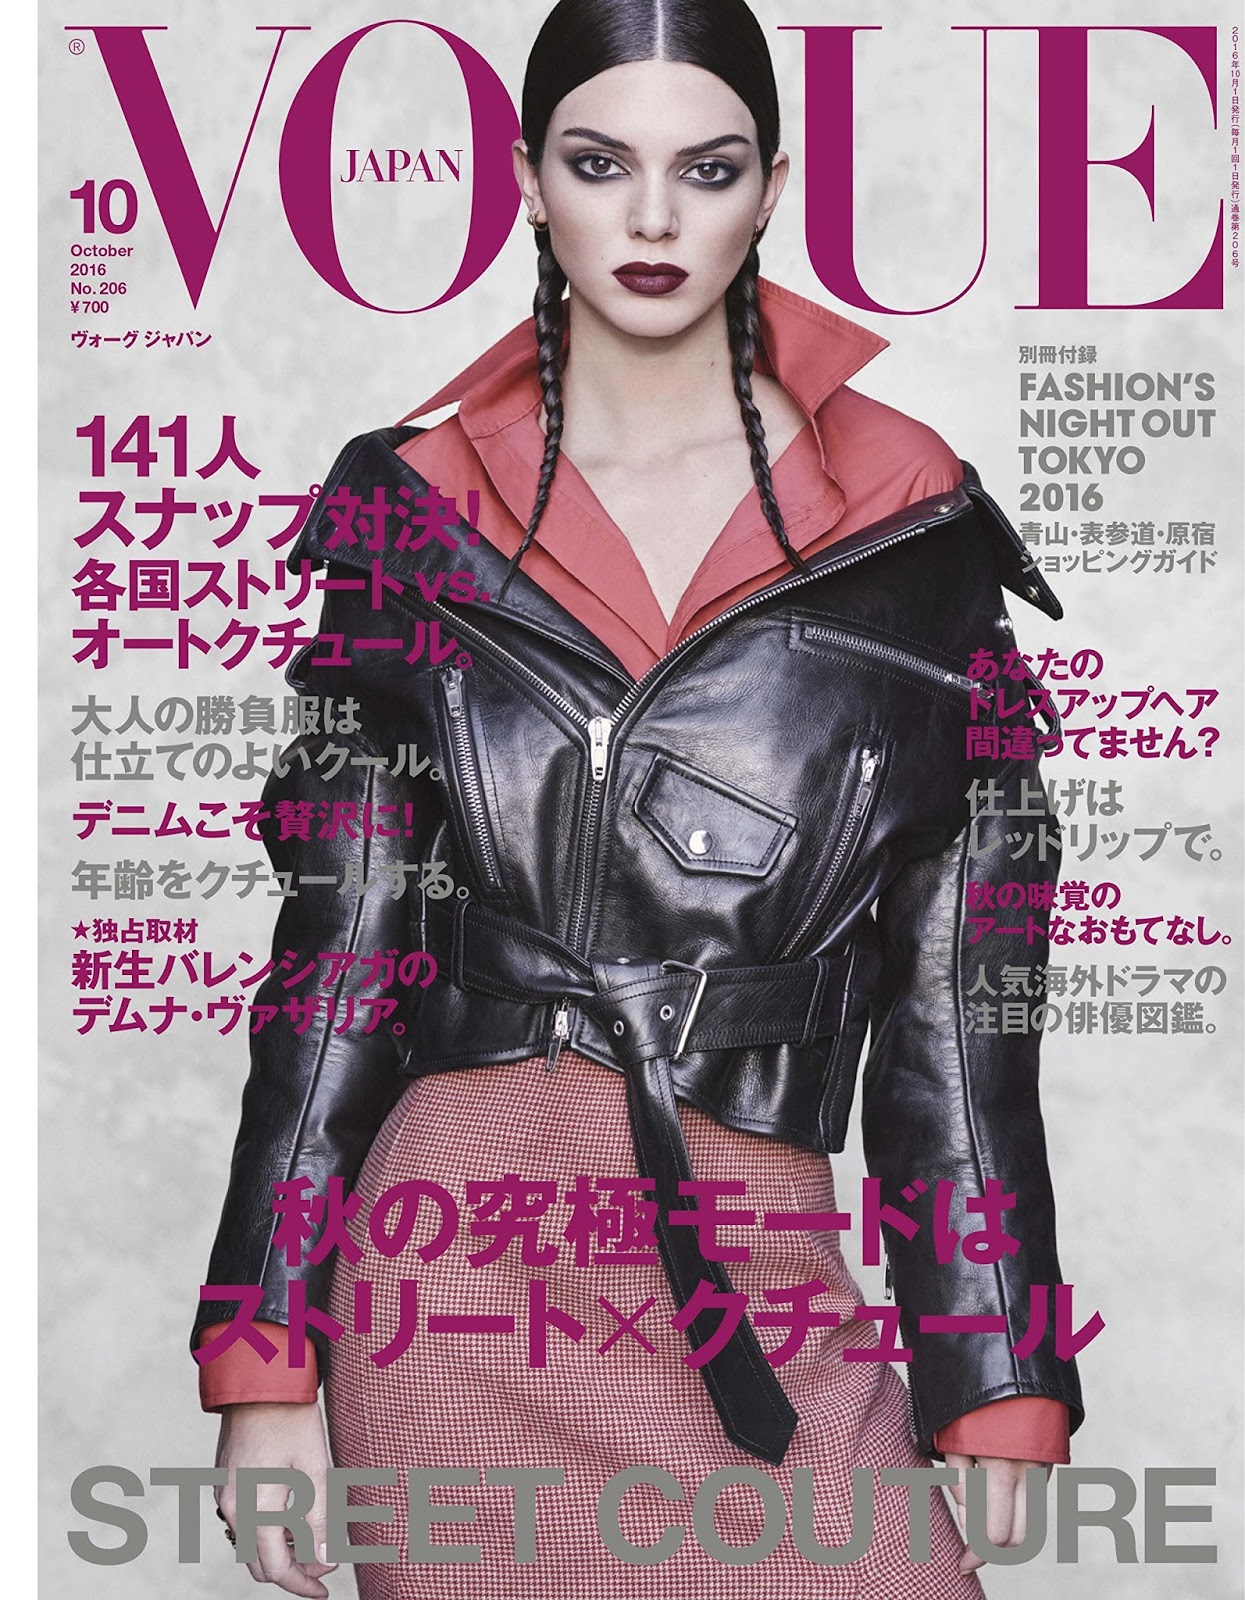 Vogue's Covers: Kendall Jenner